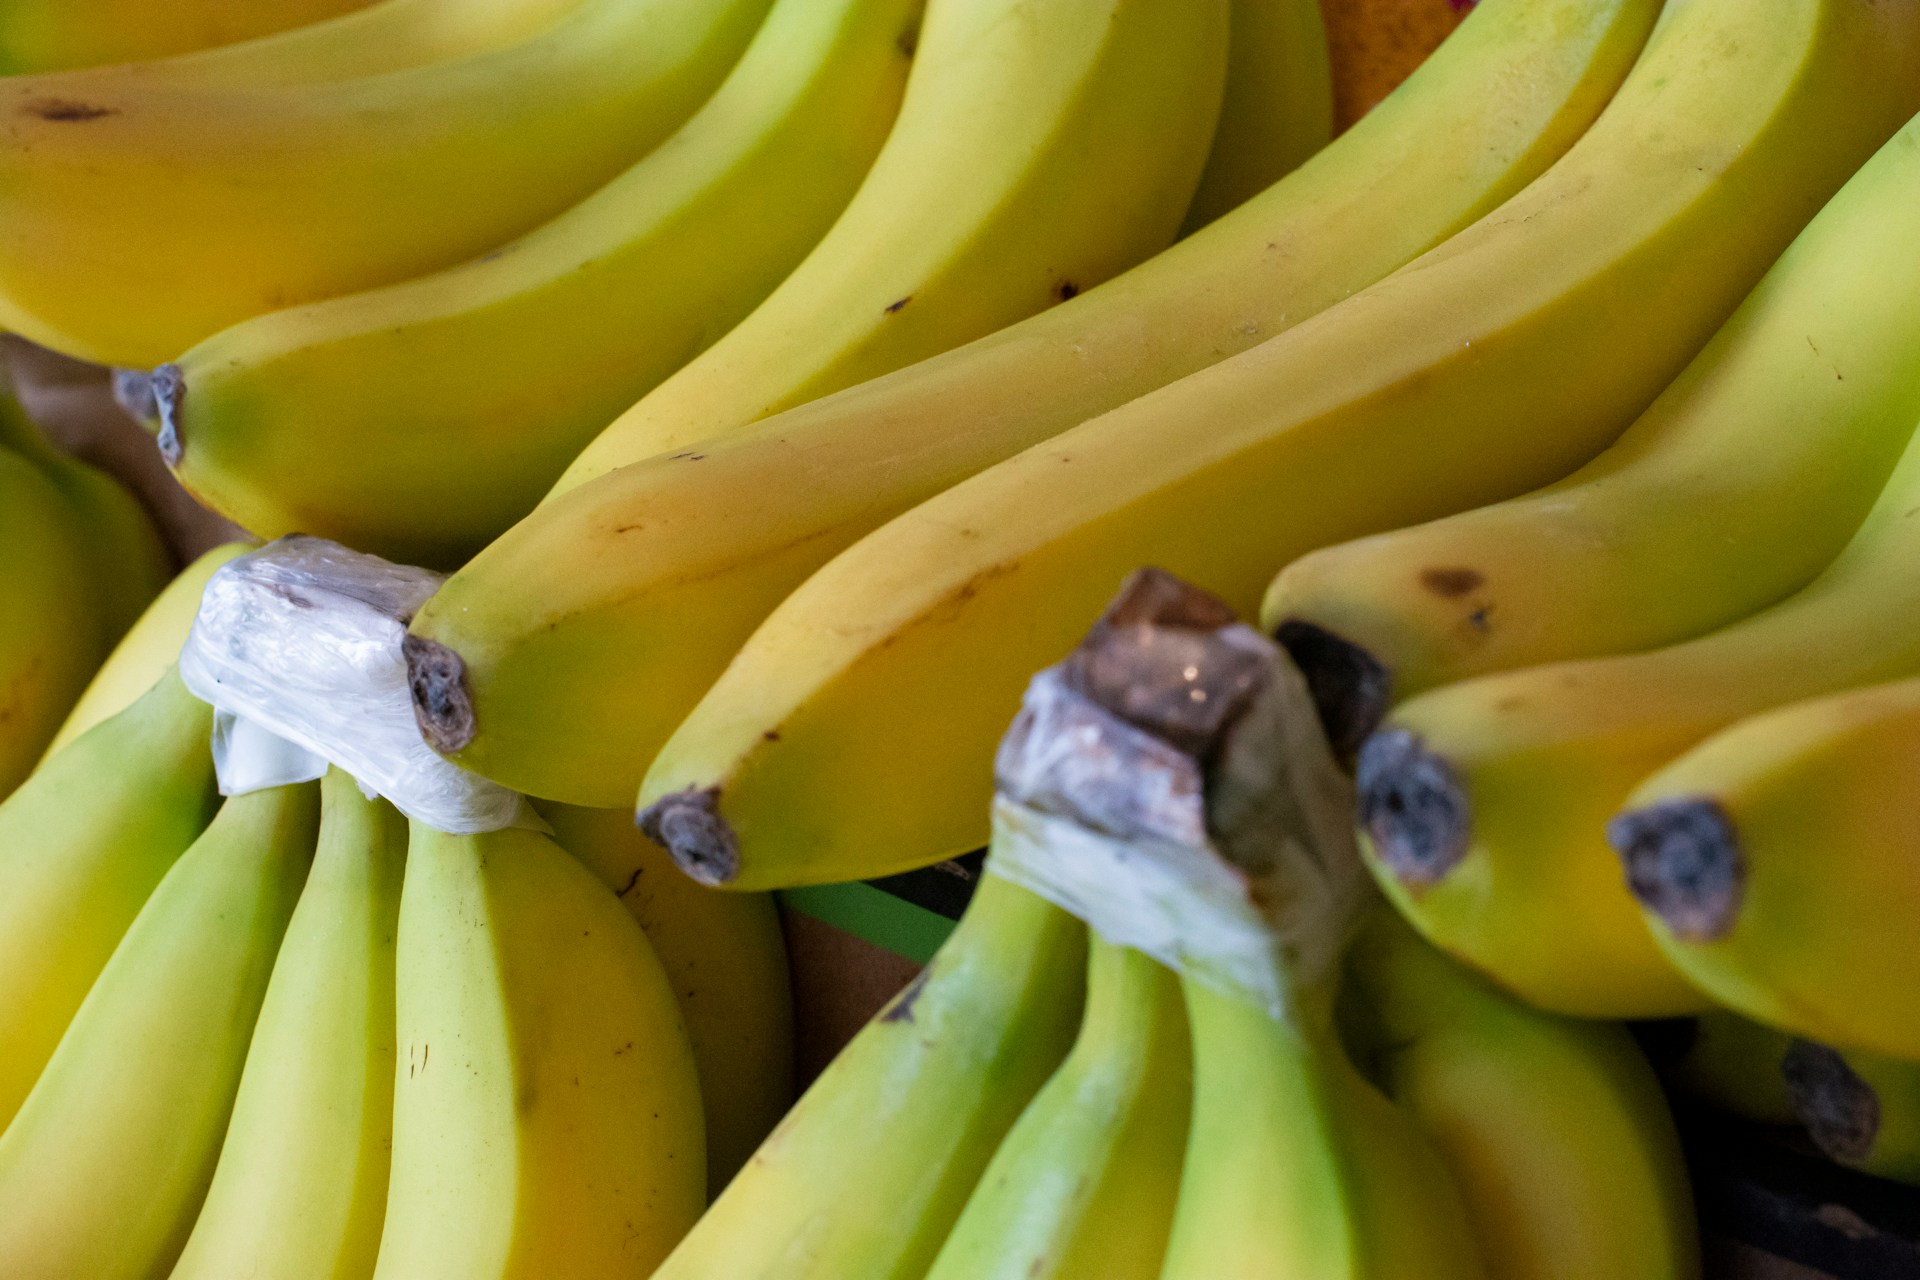 consumer-preferences-and-trends-in-banana-consumption